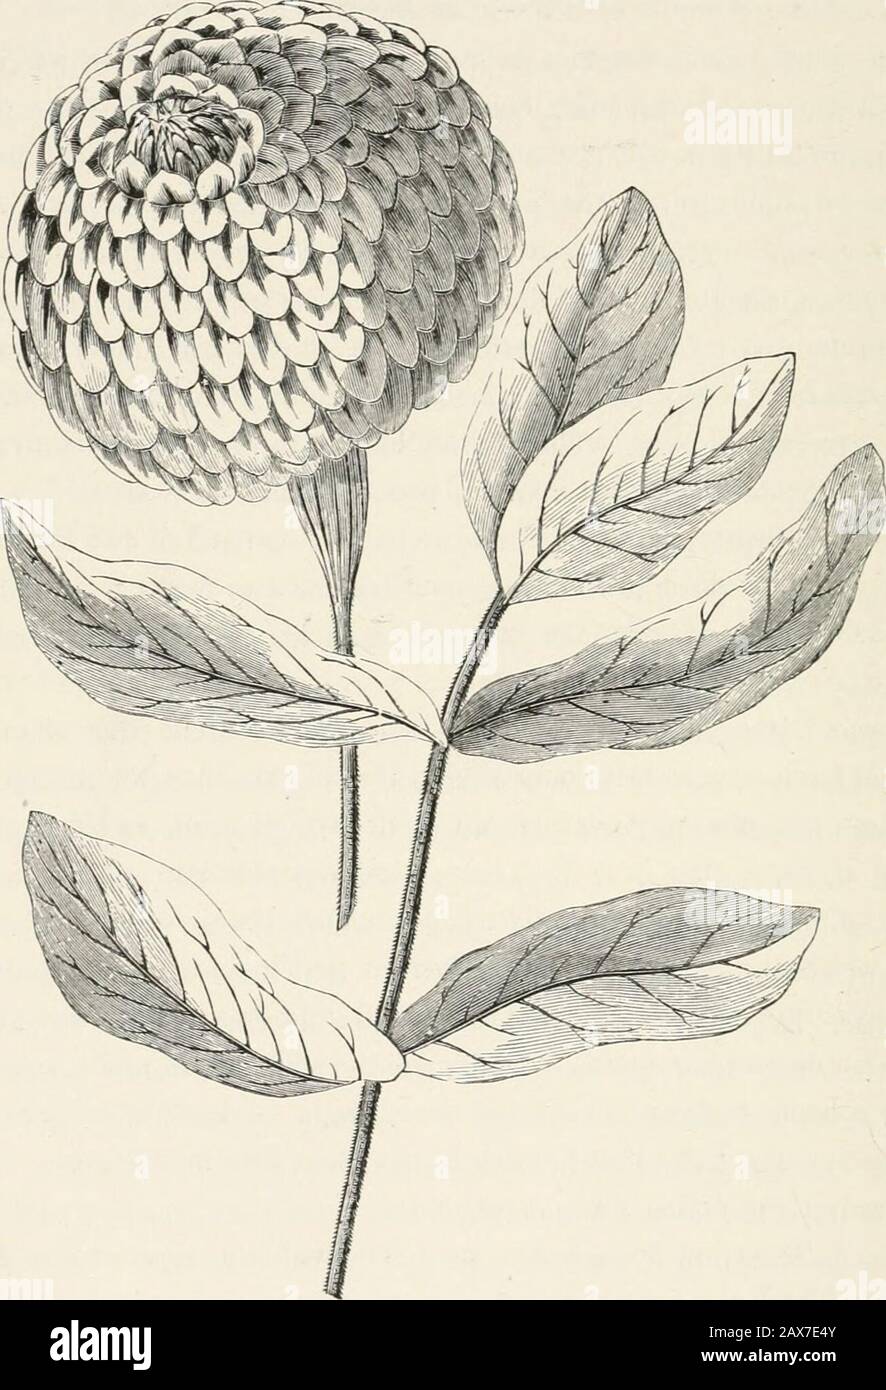 The American journal of horticulture and florist's companion . a persistingcharacter. The rays are a dull red, turning to a faded brown, and so continue;while the disk, which at first is flat, projects as the florets successivelybloom, until it forms a cone, when it presents an unsightly appearance.This species has long since been discarded from the flower-garden. Zinniapauciflora, or few-flowered, was introduced from Peru in 1753, and has agreat resemblance to Z. multiflora, except the small number of flowers, andthe color, which is a brownish yellow : this has also gone into exile with itsre Stock Photo